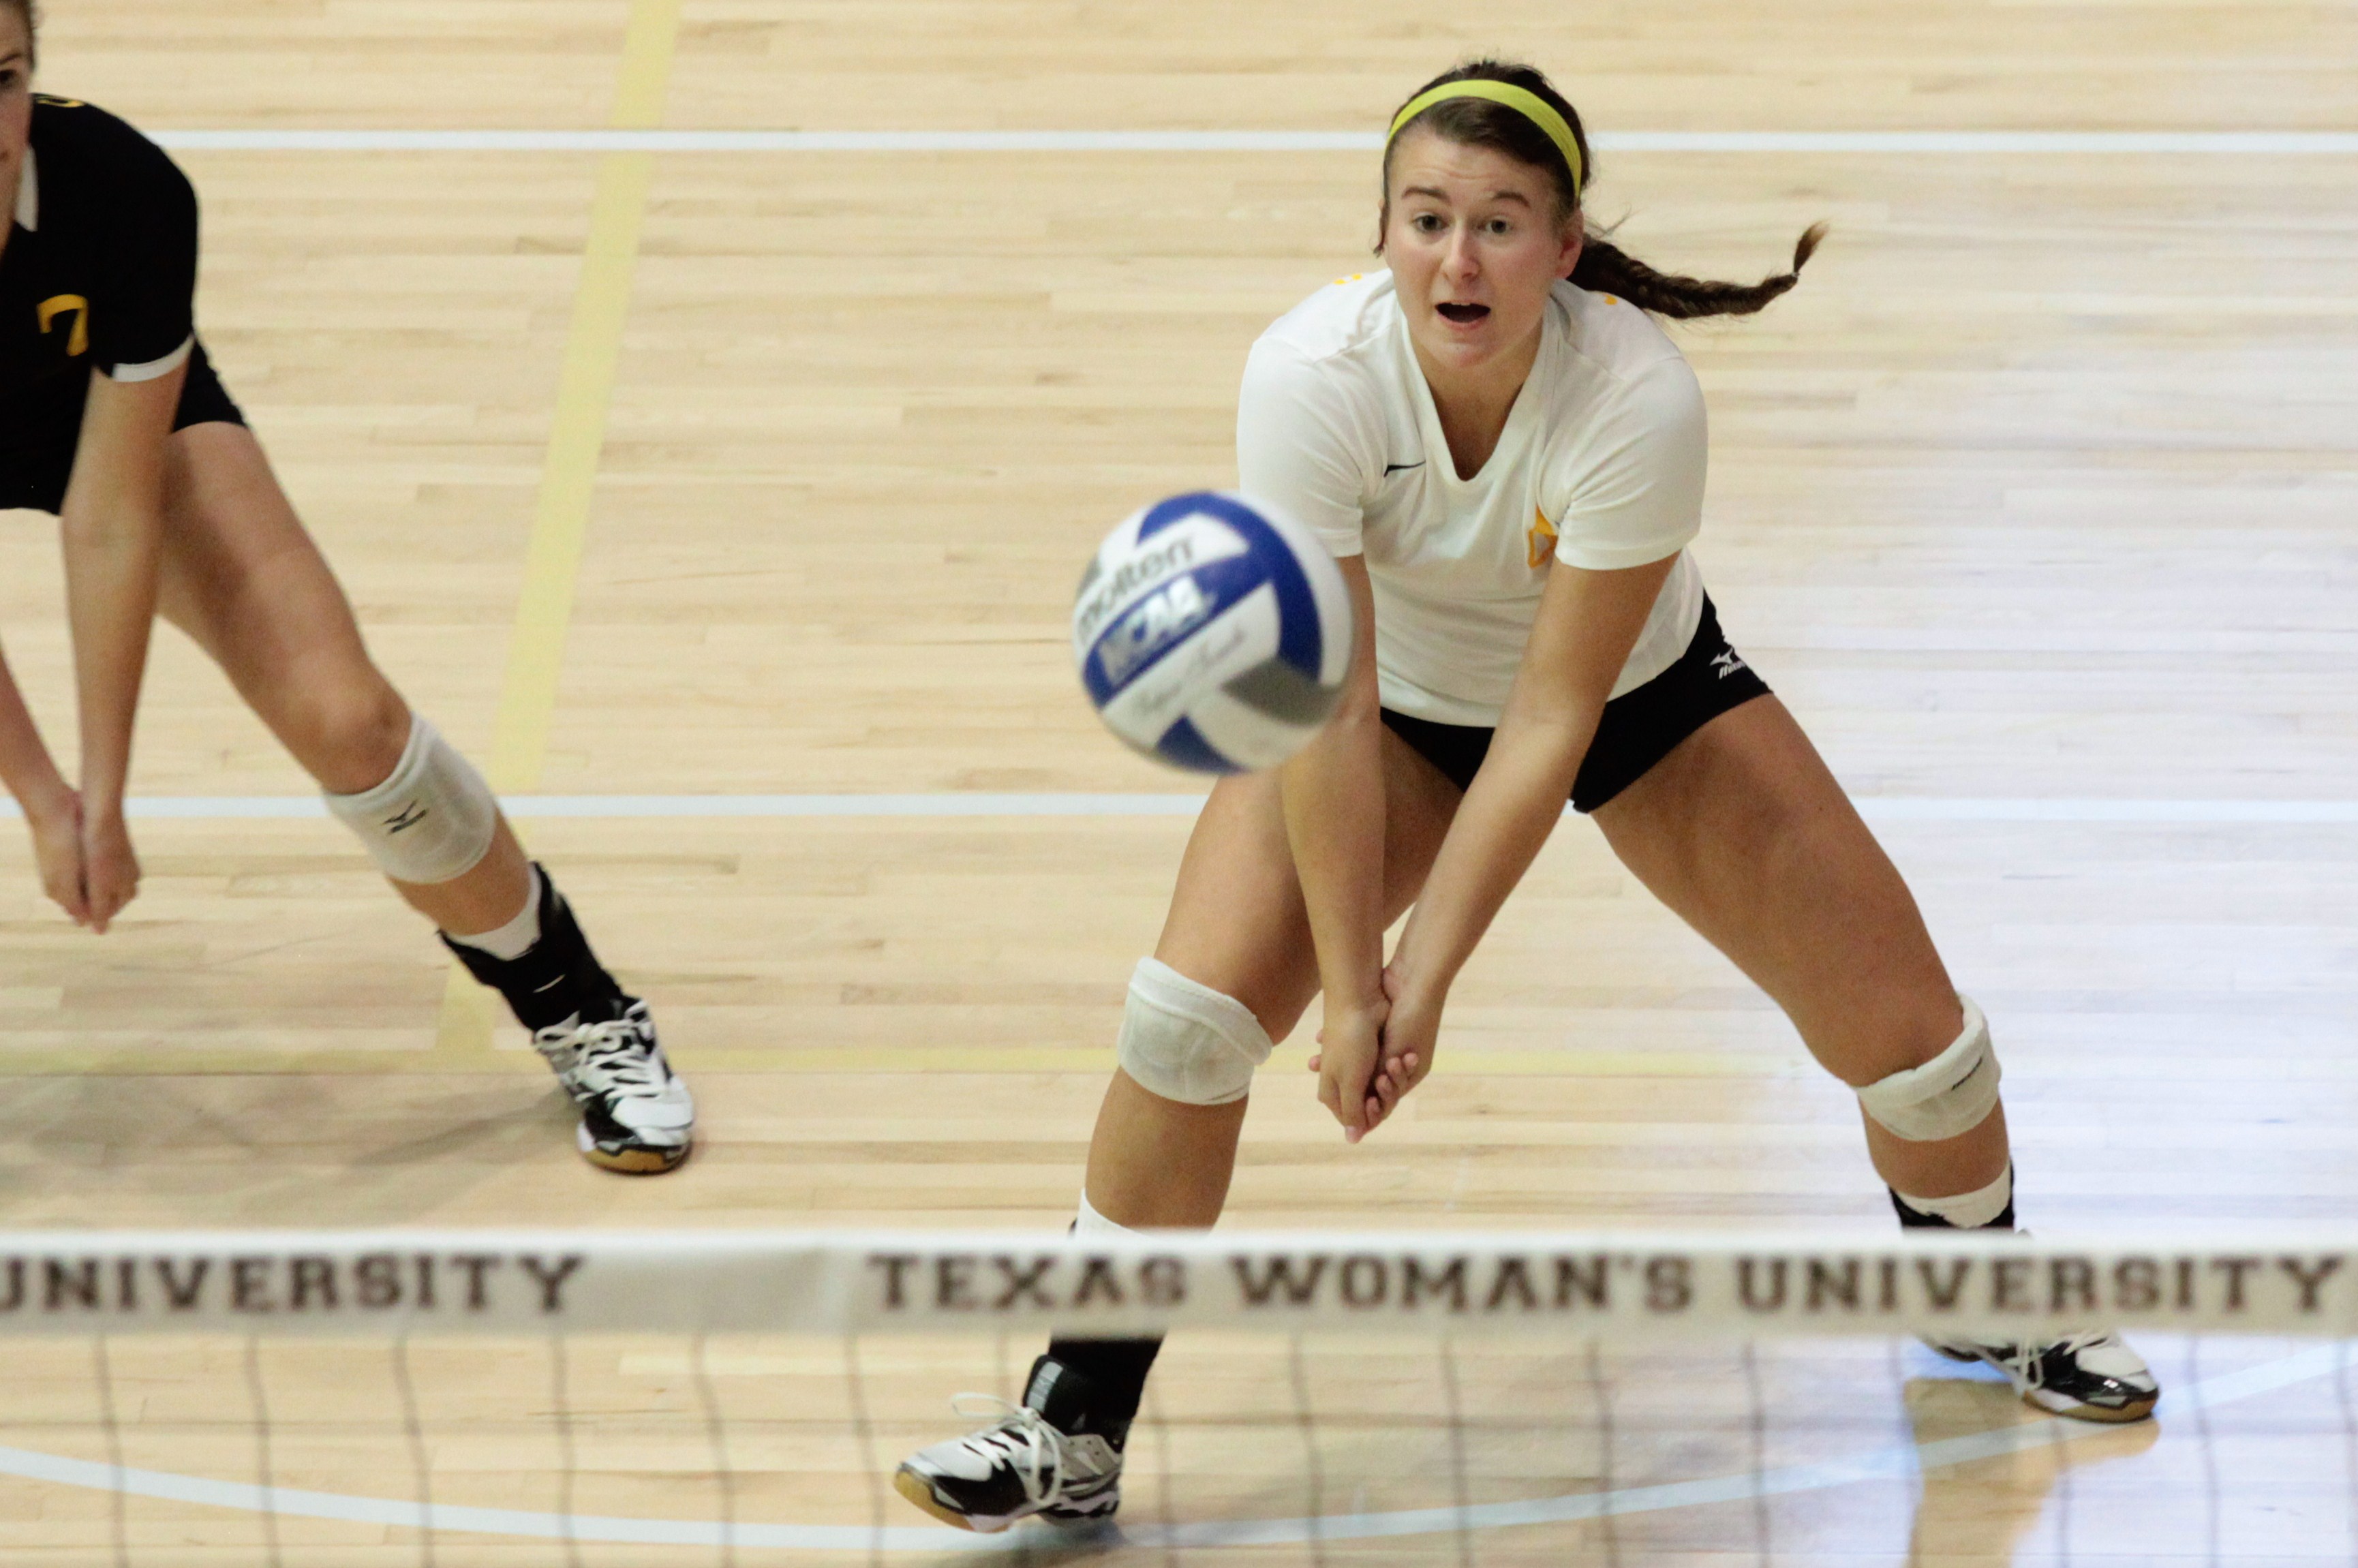 Aggies drop a give-set matchup to Texas Woman’s